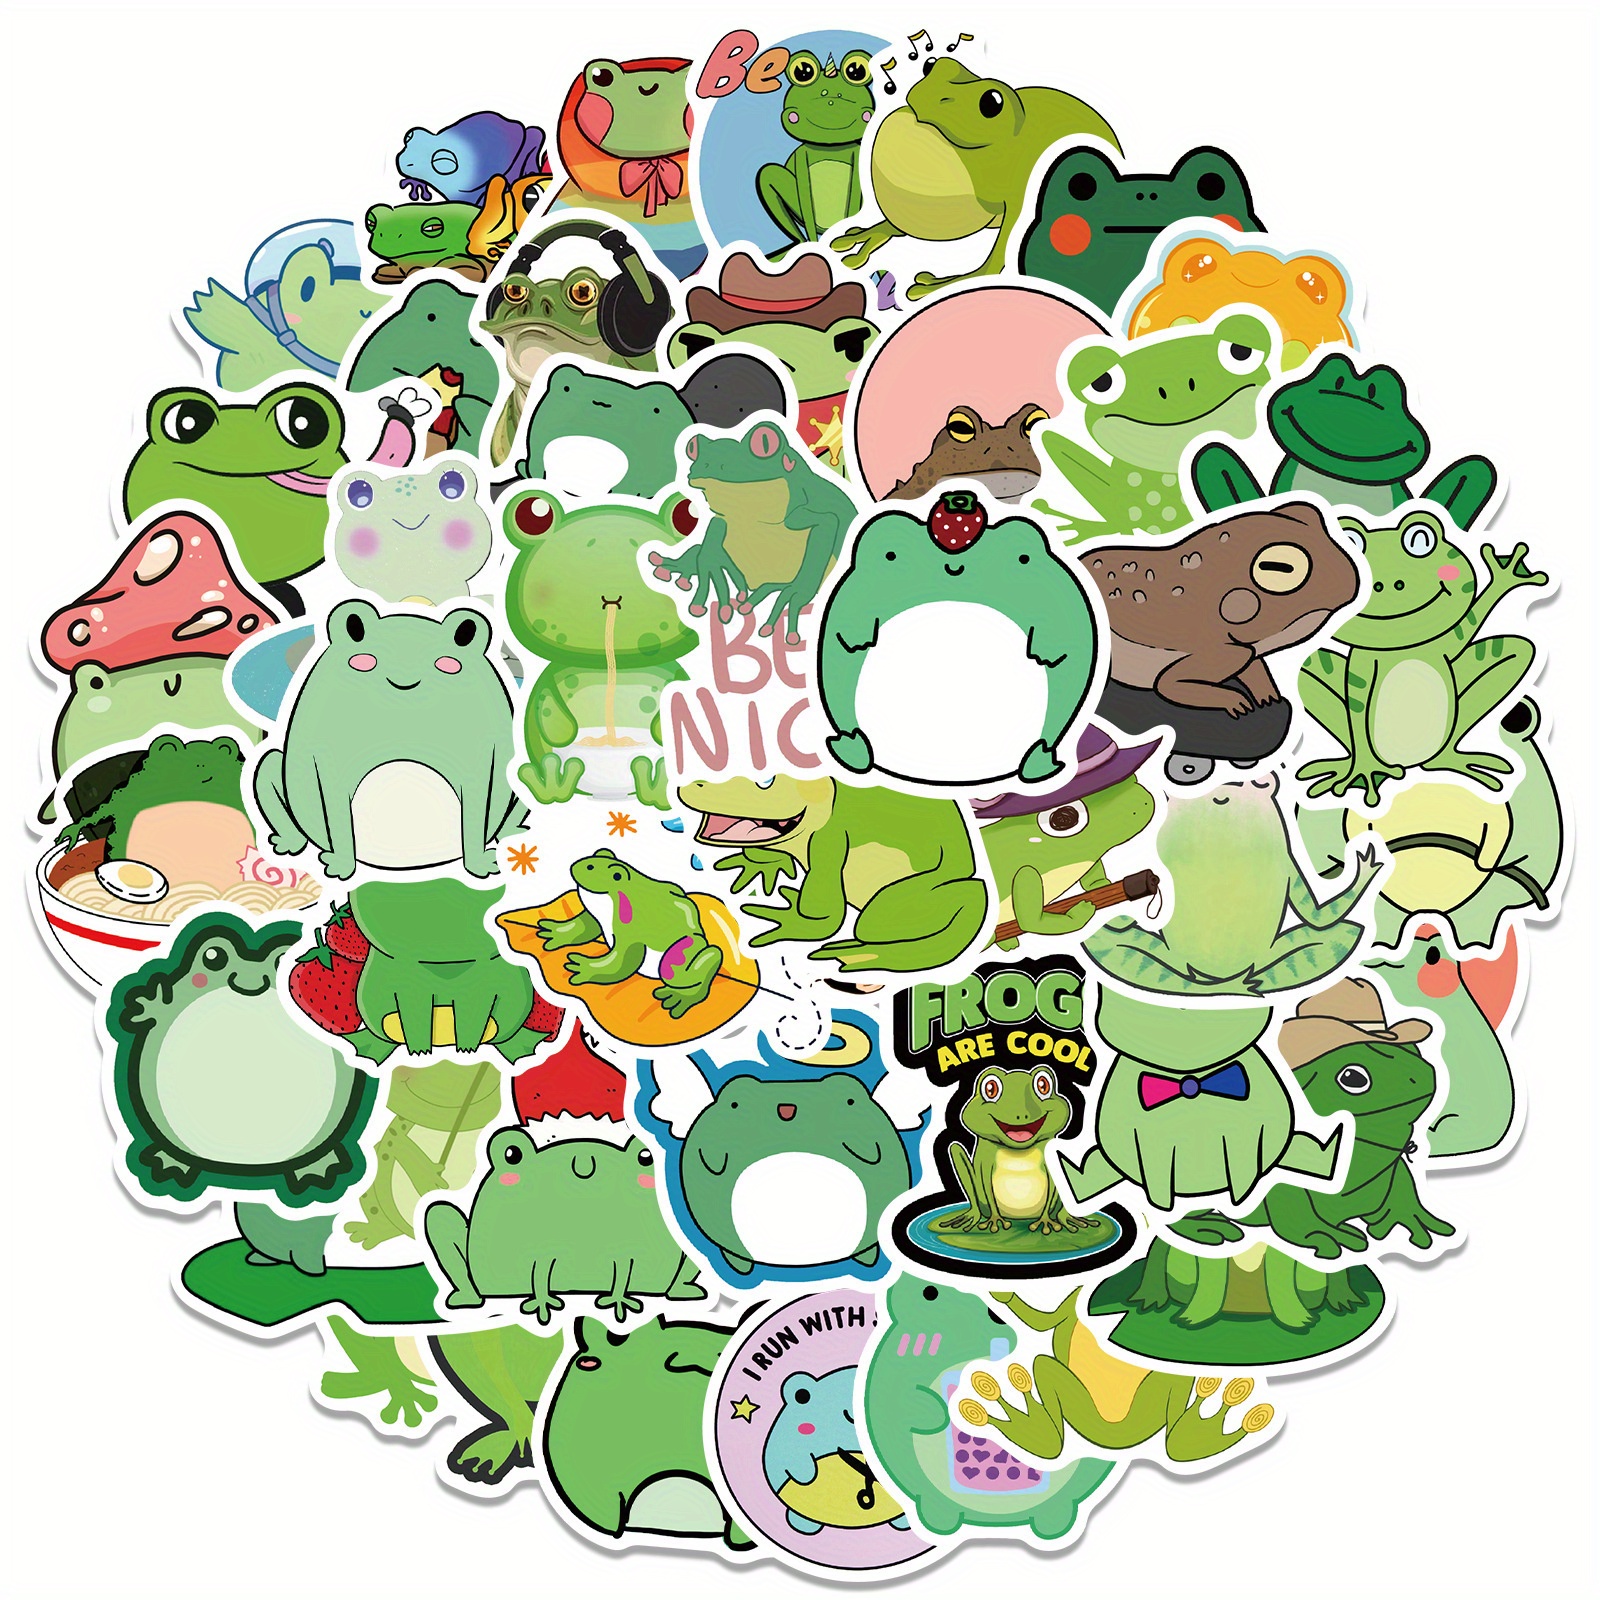 100 Pieces Frog Stickers Cartoon Vinyl Waterproof Stickers for  Laptop,Guitar,Motorcycle,Bike,Skateboard,Luggage,Phone,Hydro Flask, Gift  for Kids Teen Birthday Party 